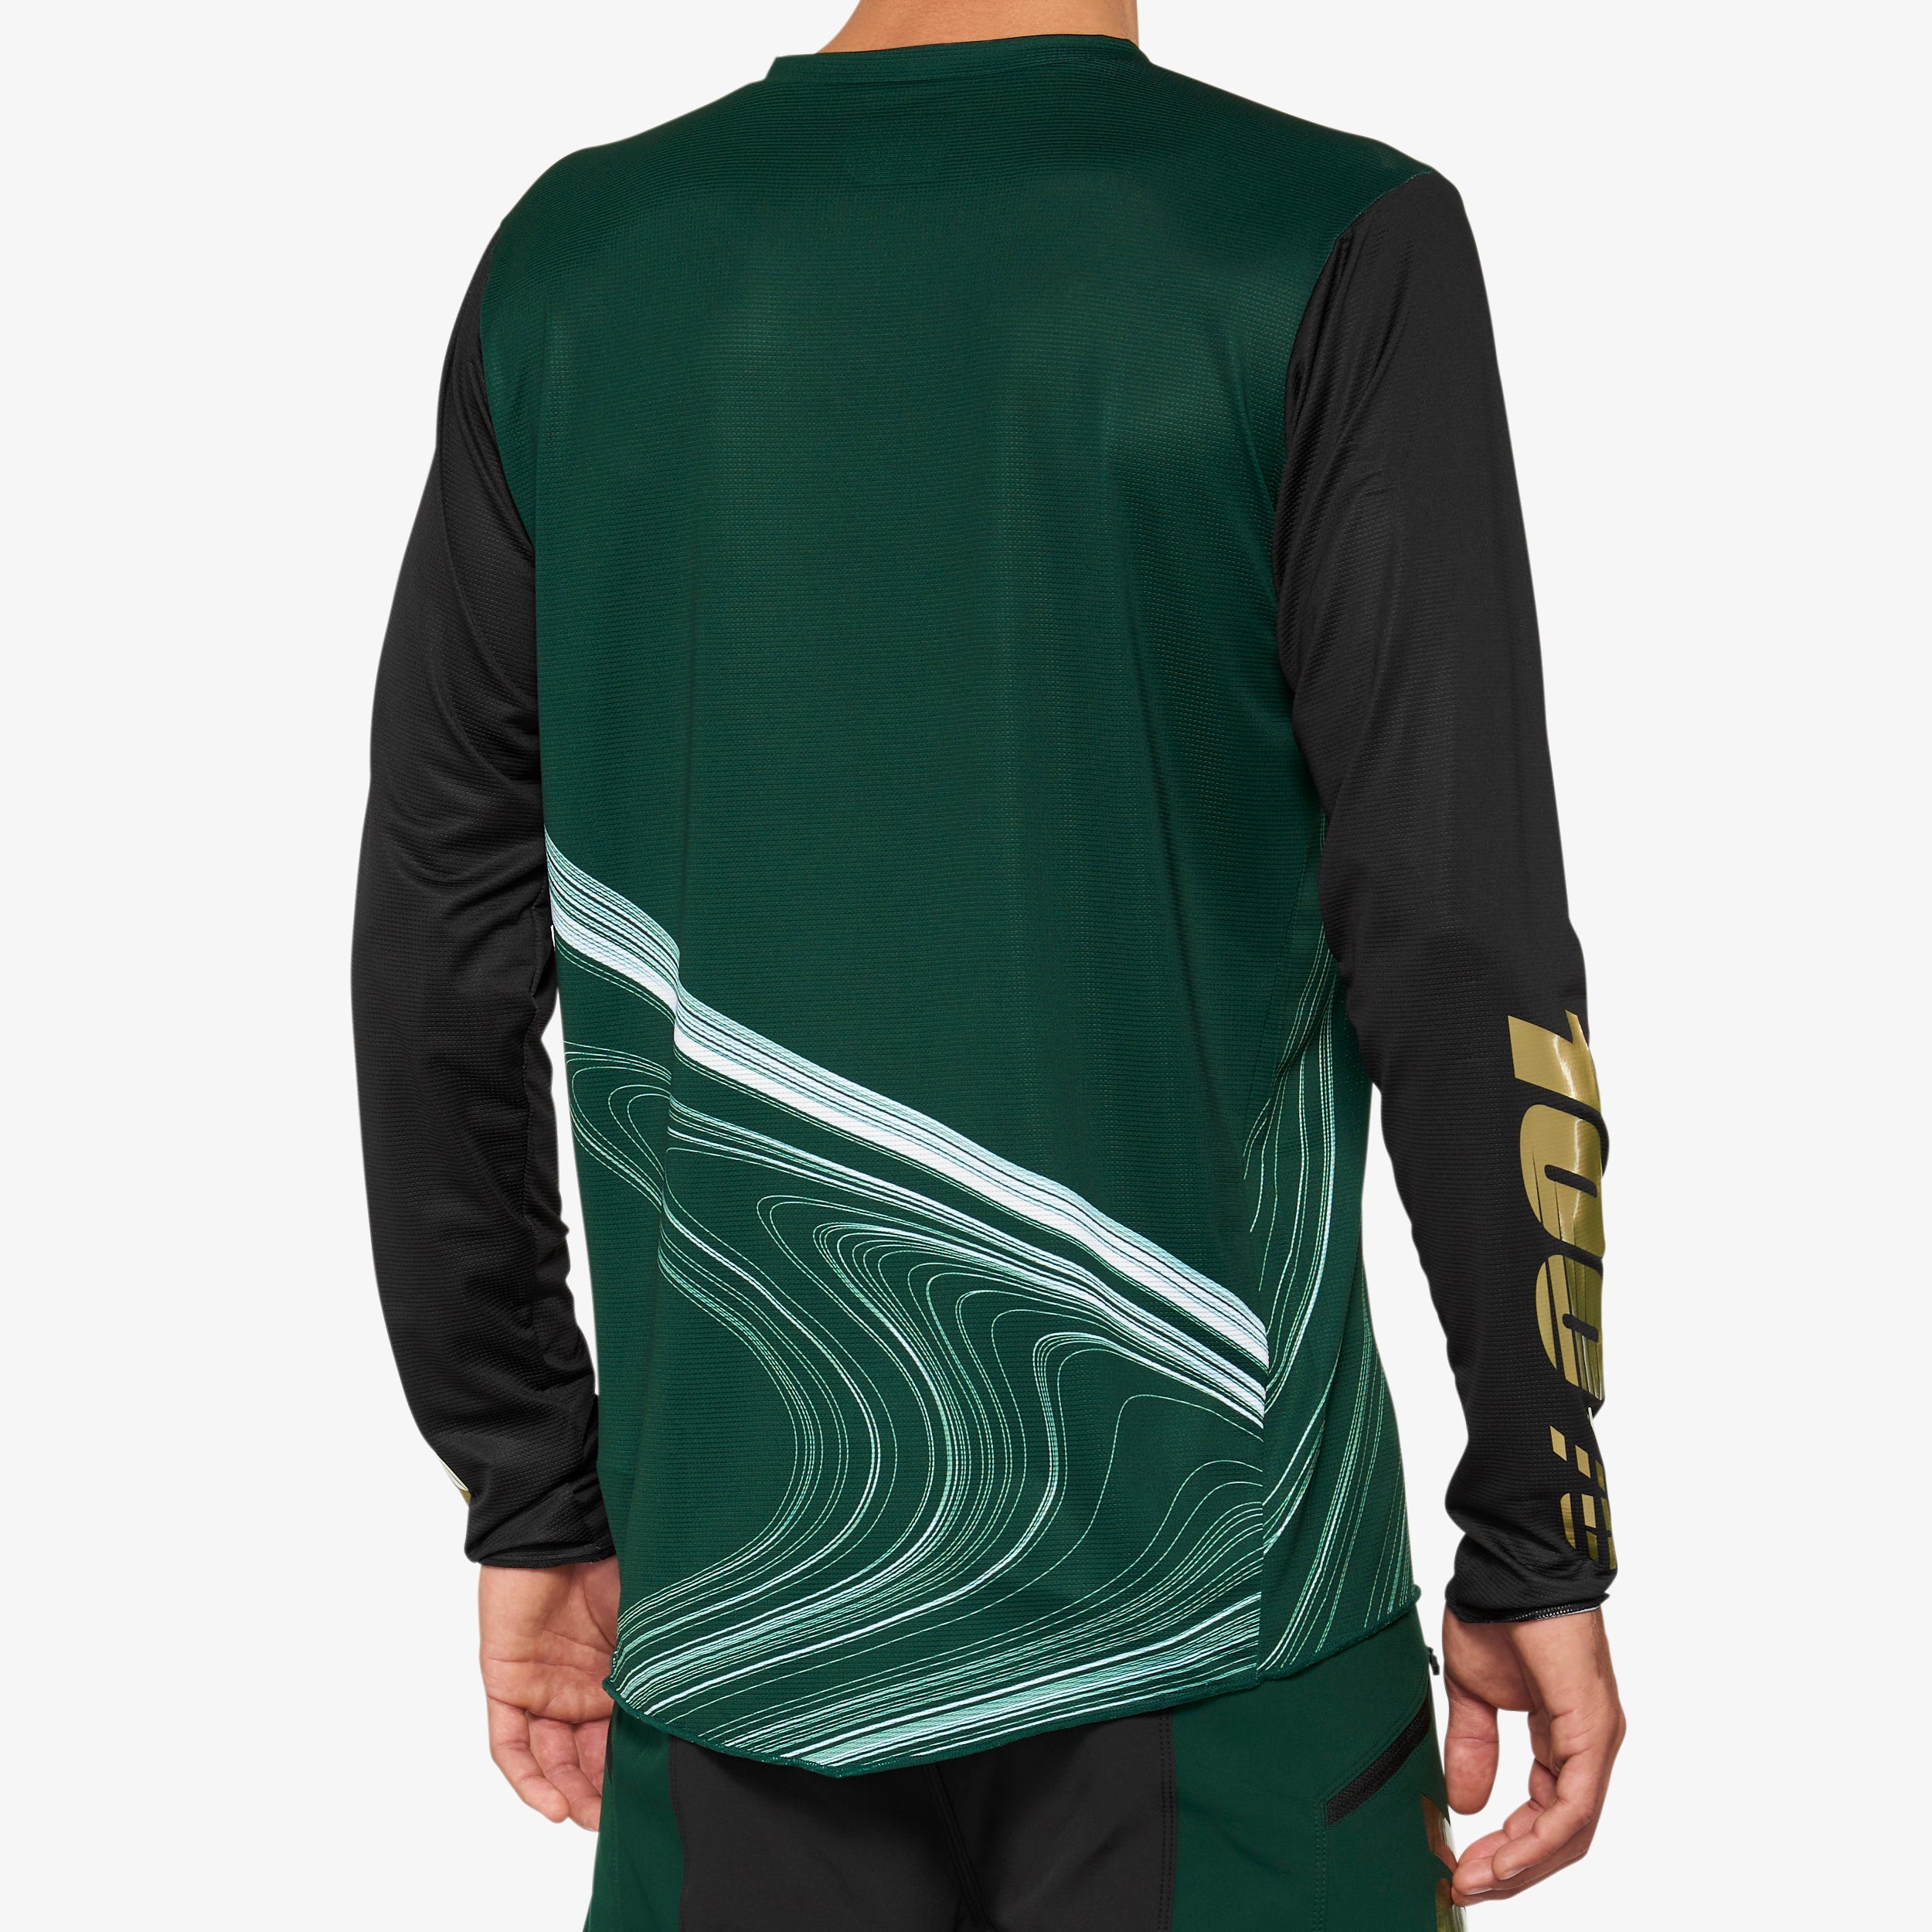 R-CORE-X LE Long Sleeve Jersey Forest Green - Secondary